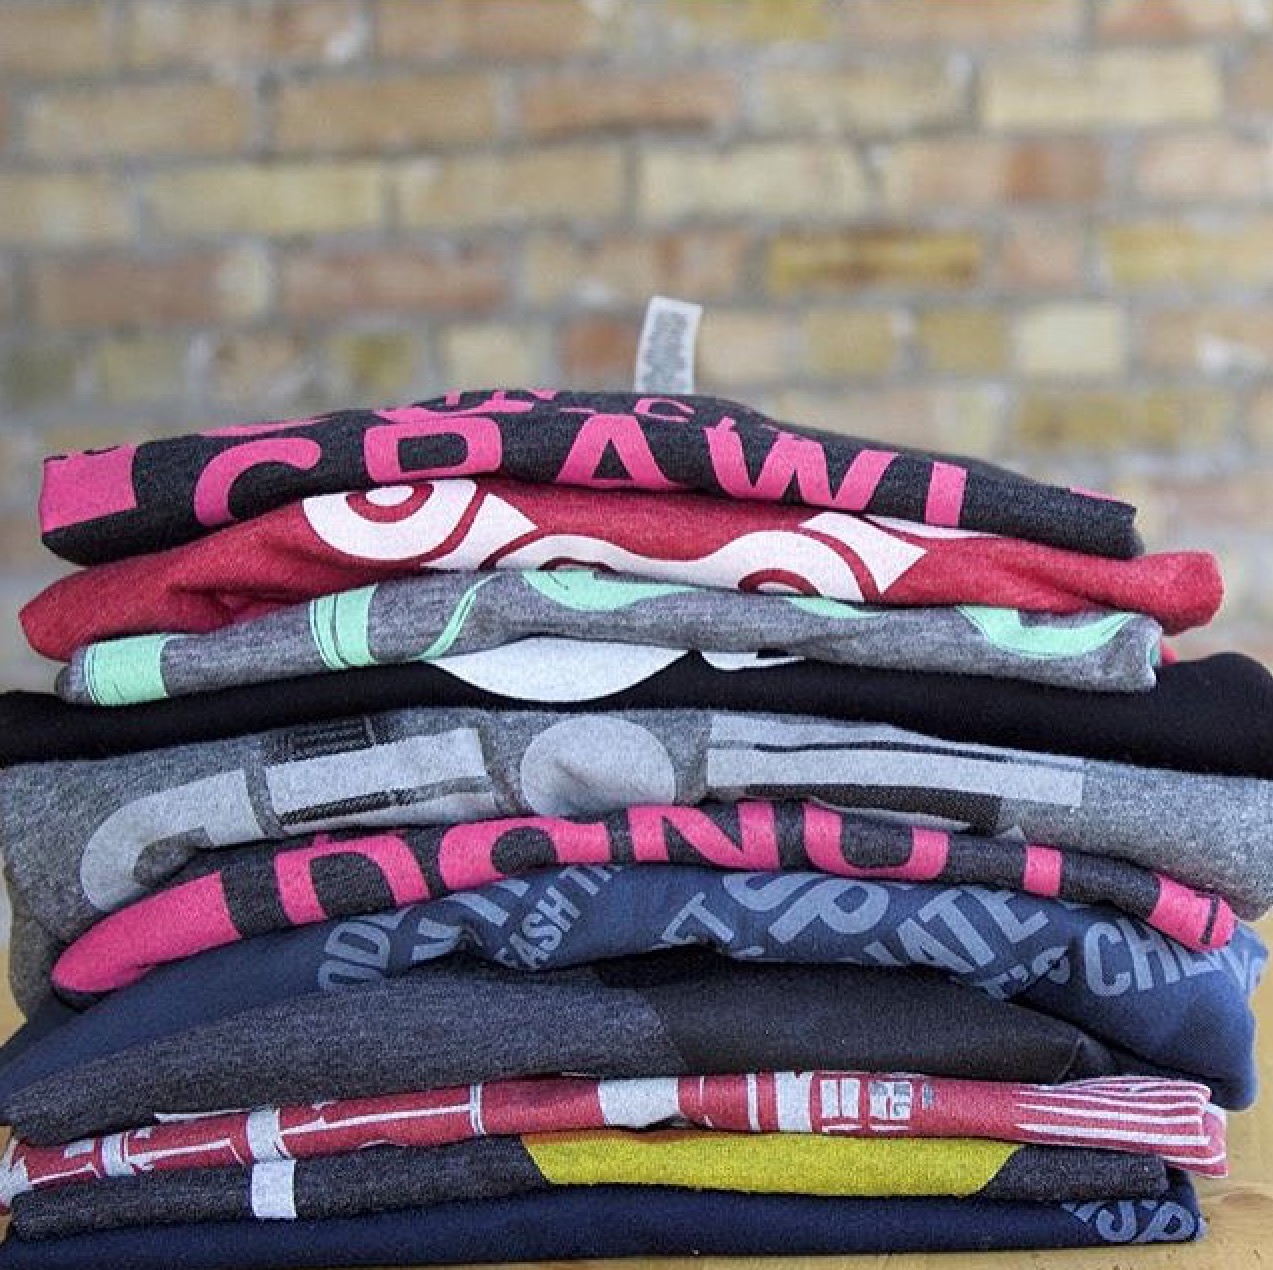 Stacked t-shirts showing branded merchandise